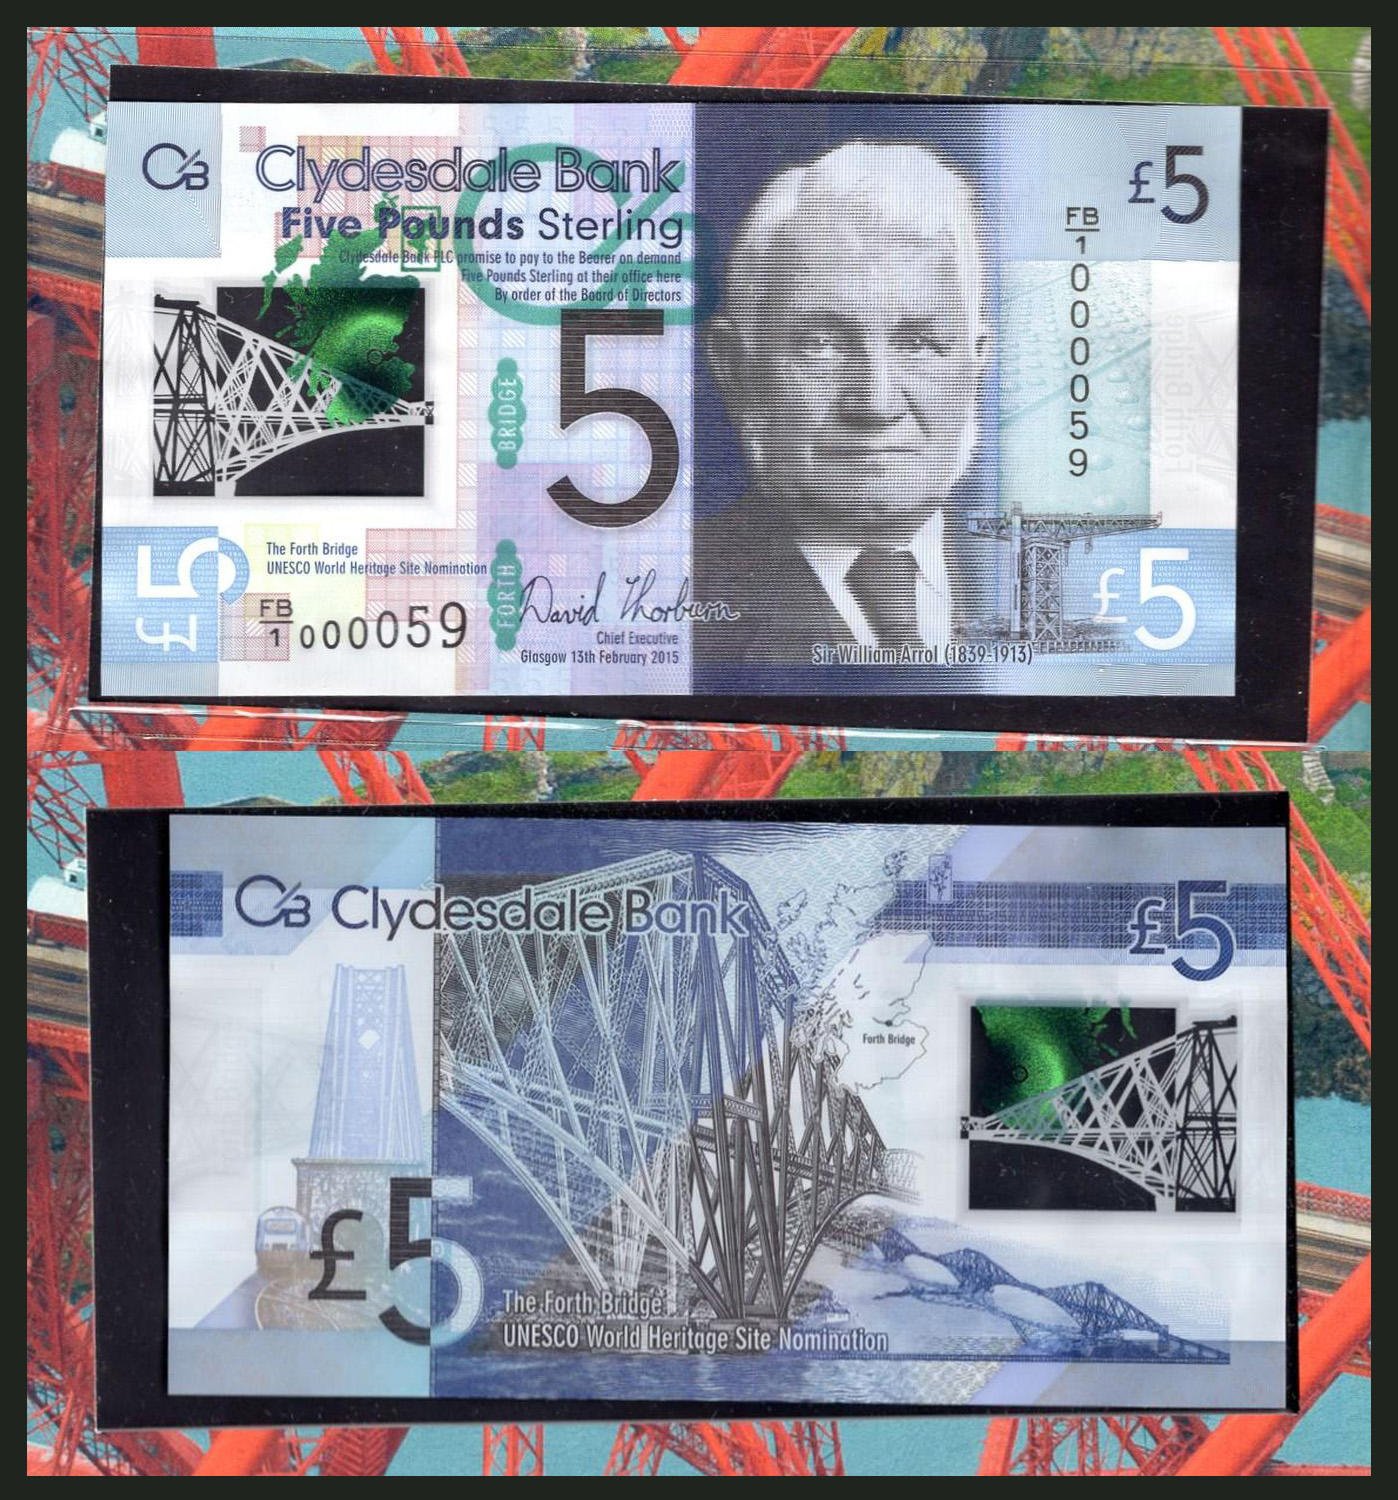 new 2015 Clydesdale Bank £5 Five Pound polymer banknote UNC Scottish currency 